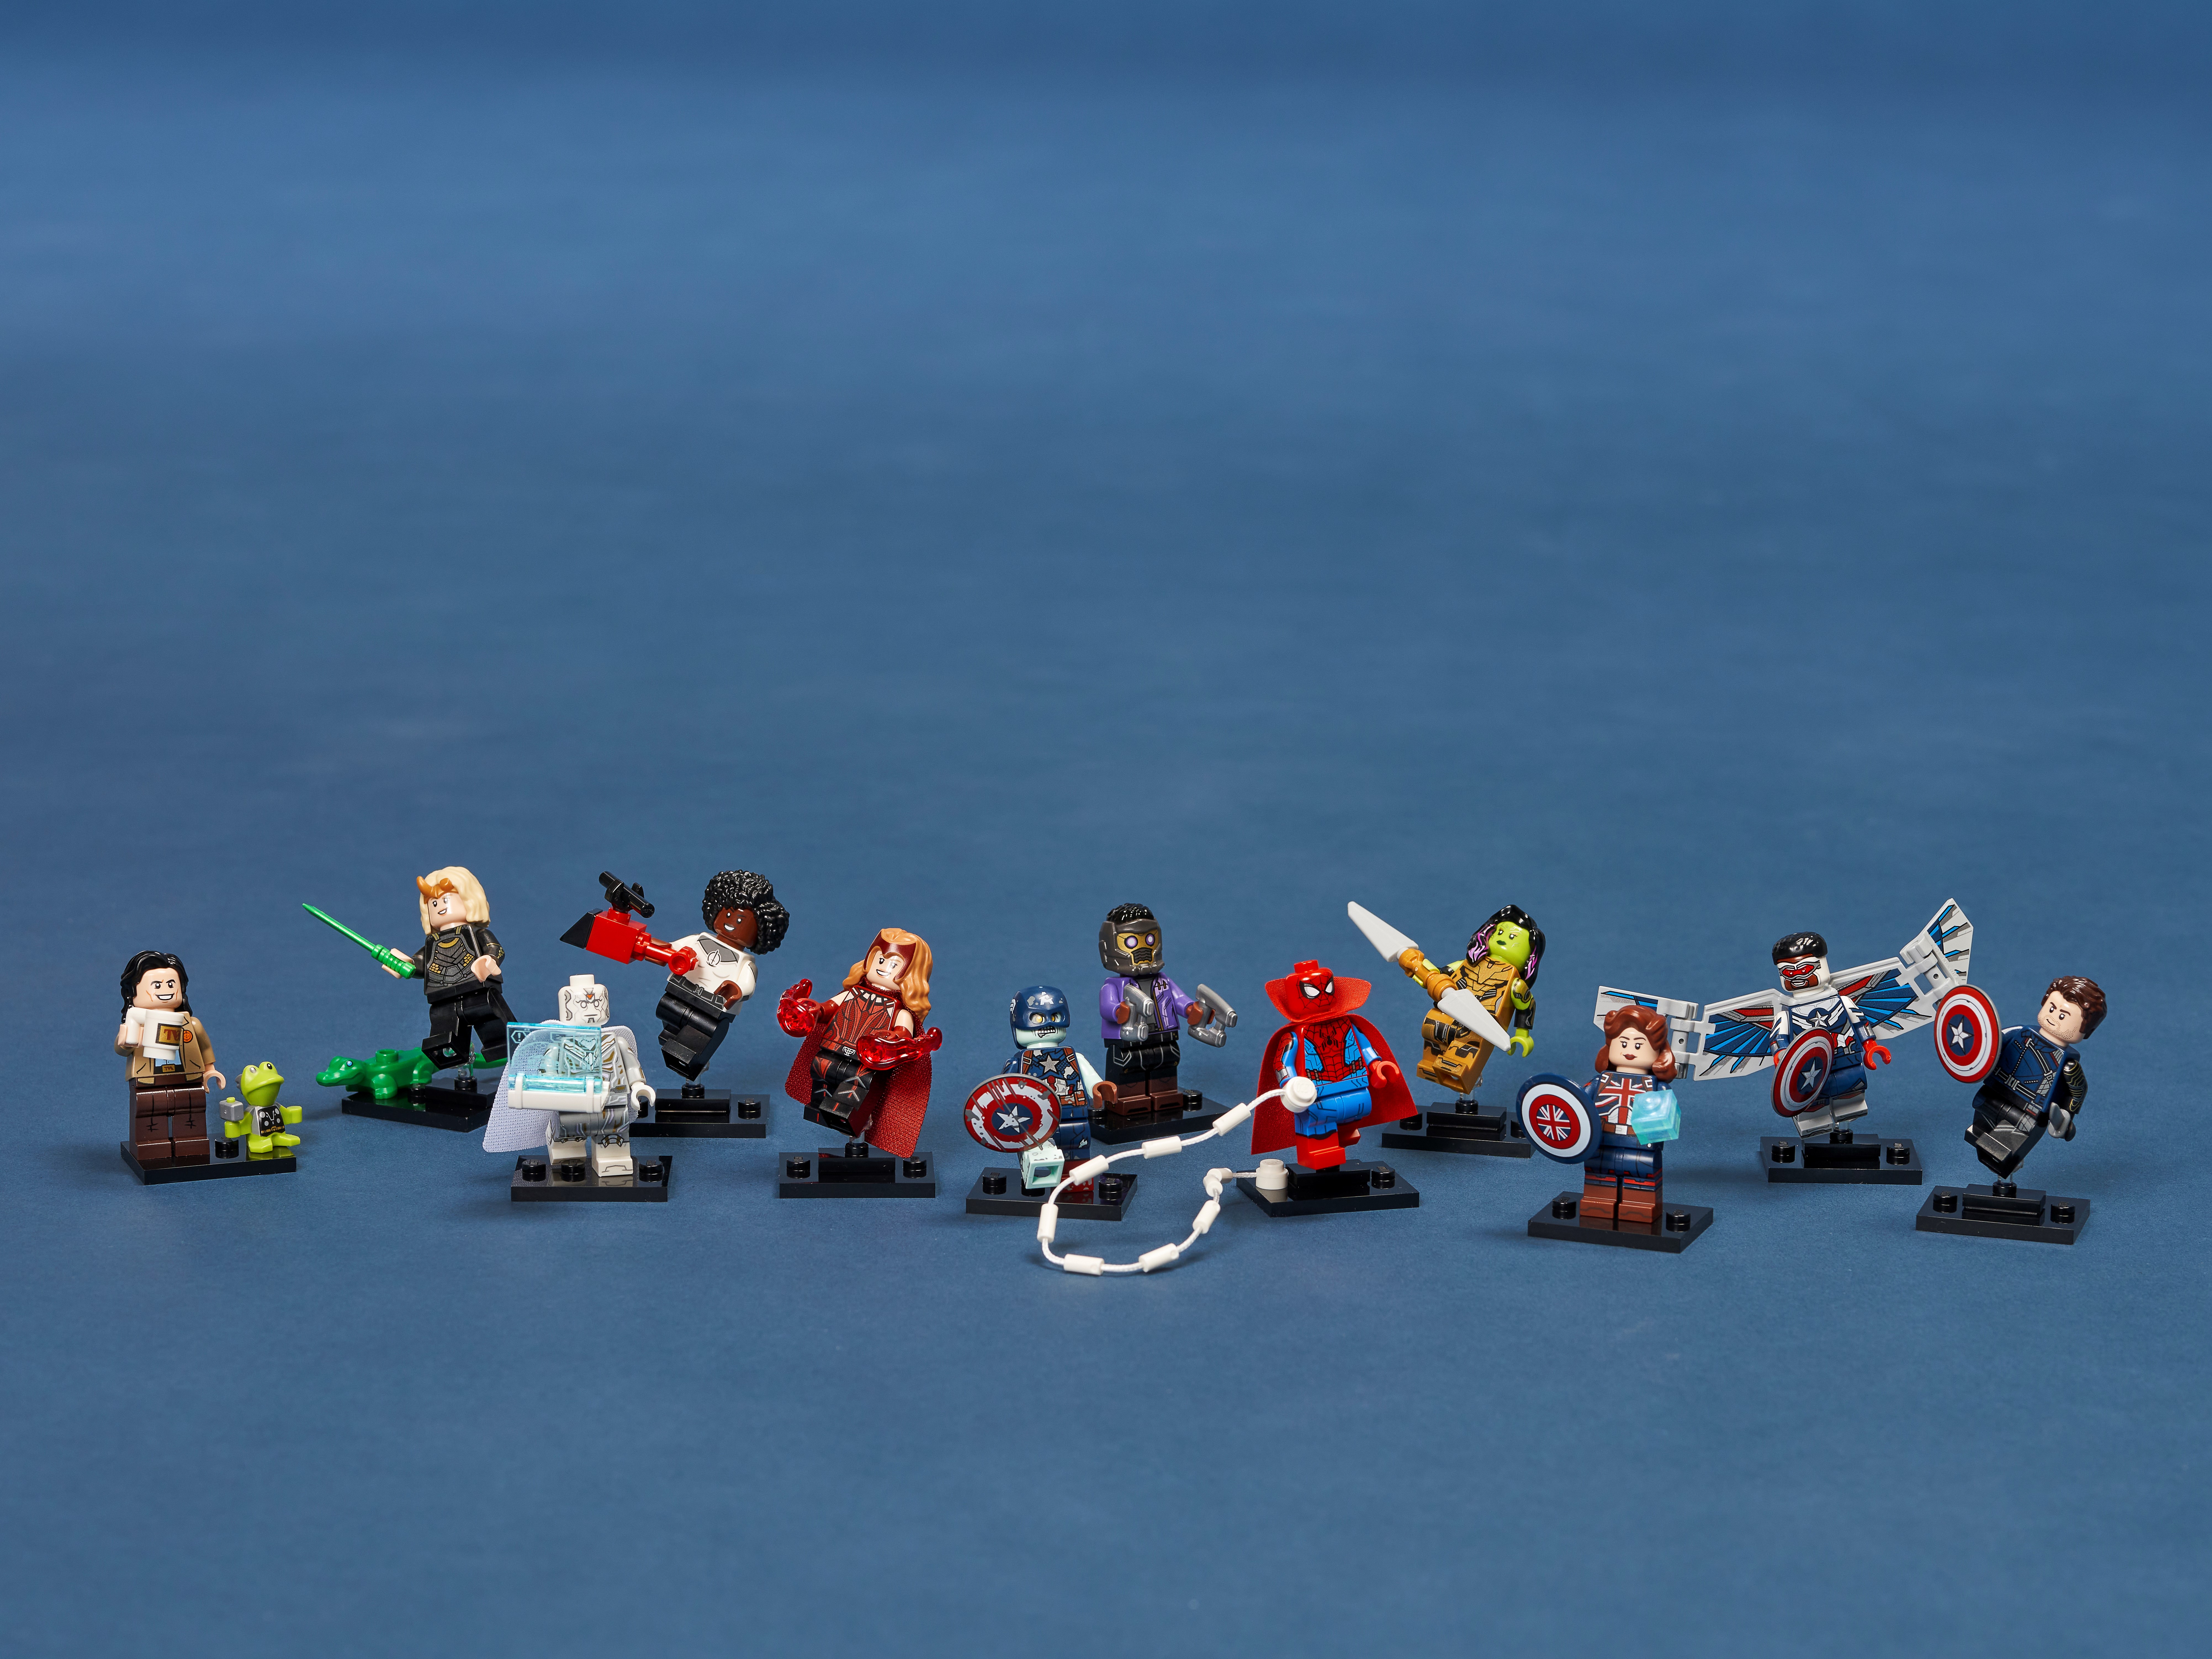 1 of 12 to Collect LEGO Minifigures Marvel Studios 71031 Building Kit; an Awesome Gift for Fans of Super Hero Building Toys; New 2021 